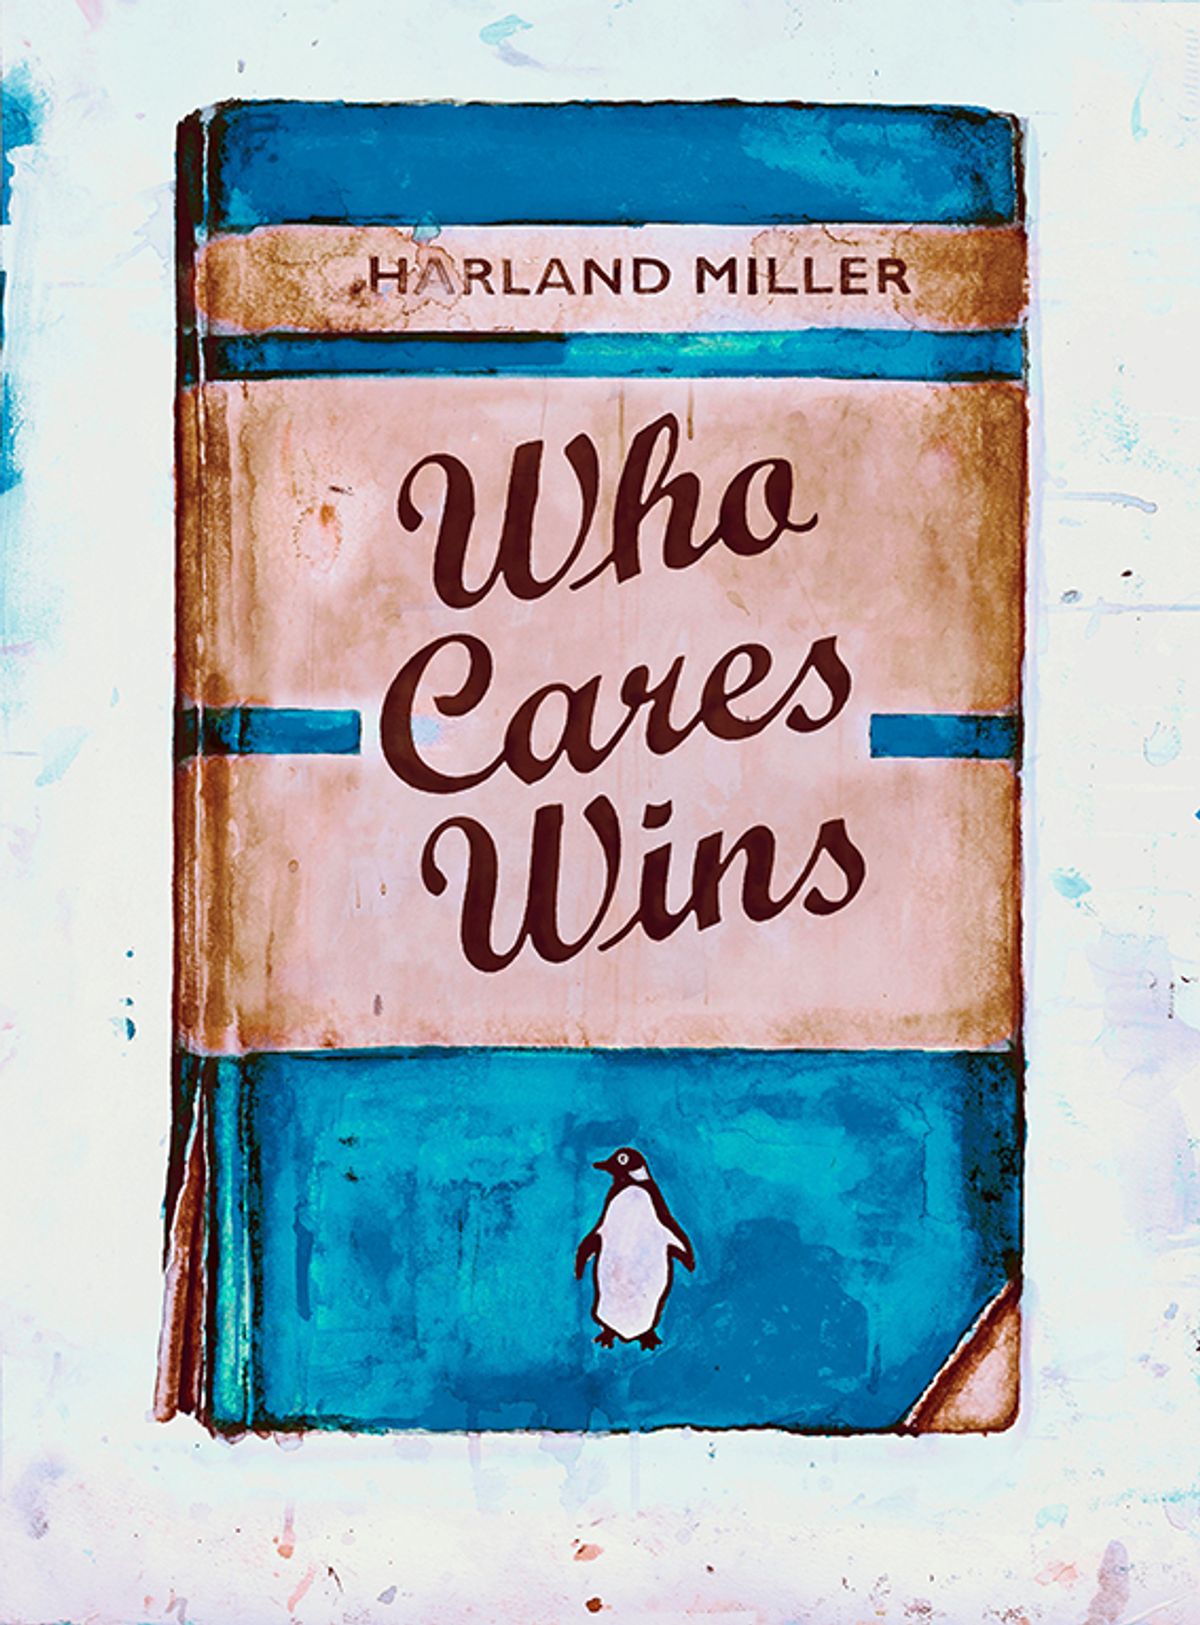 Harland Miller's Who Cares Wins (2020) Courtesy of White Cube and the artist